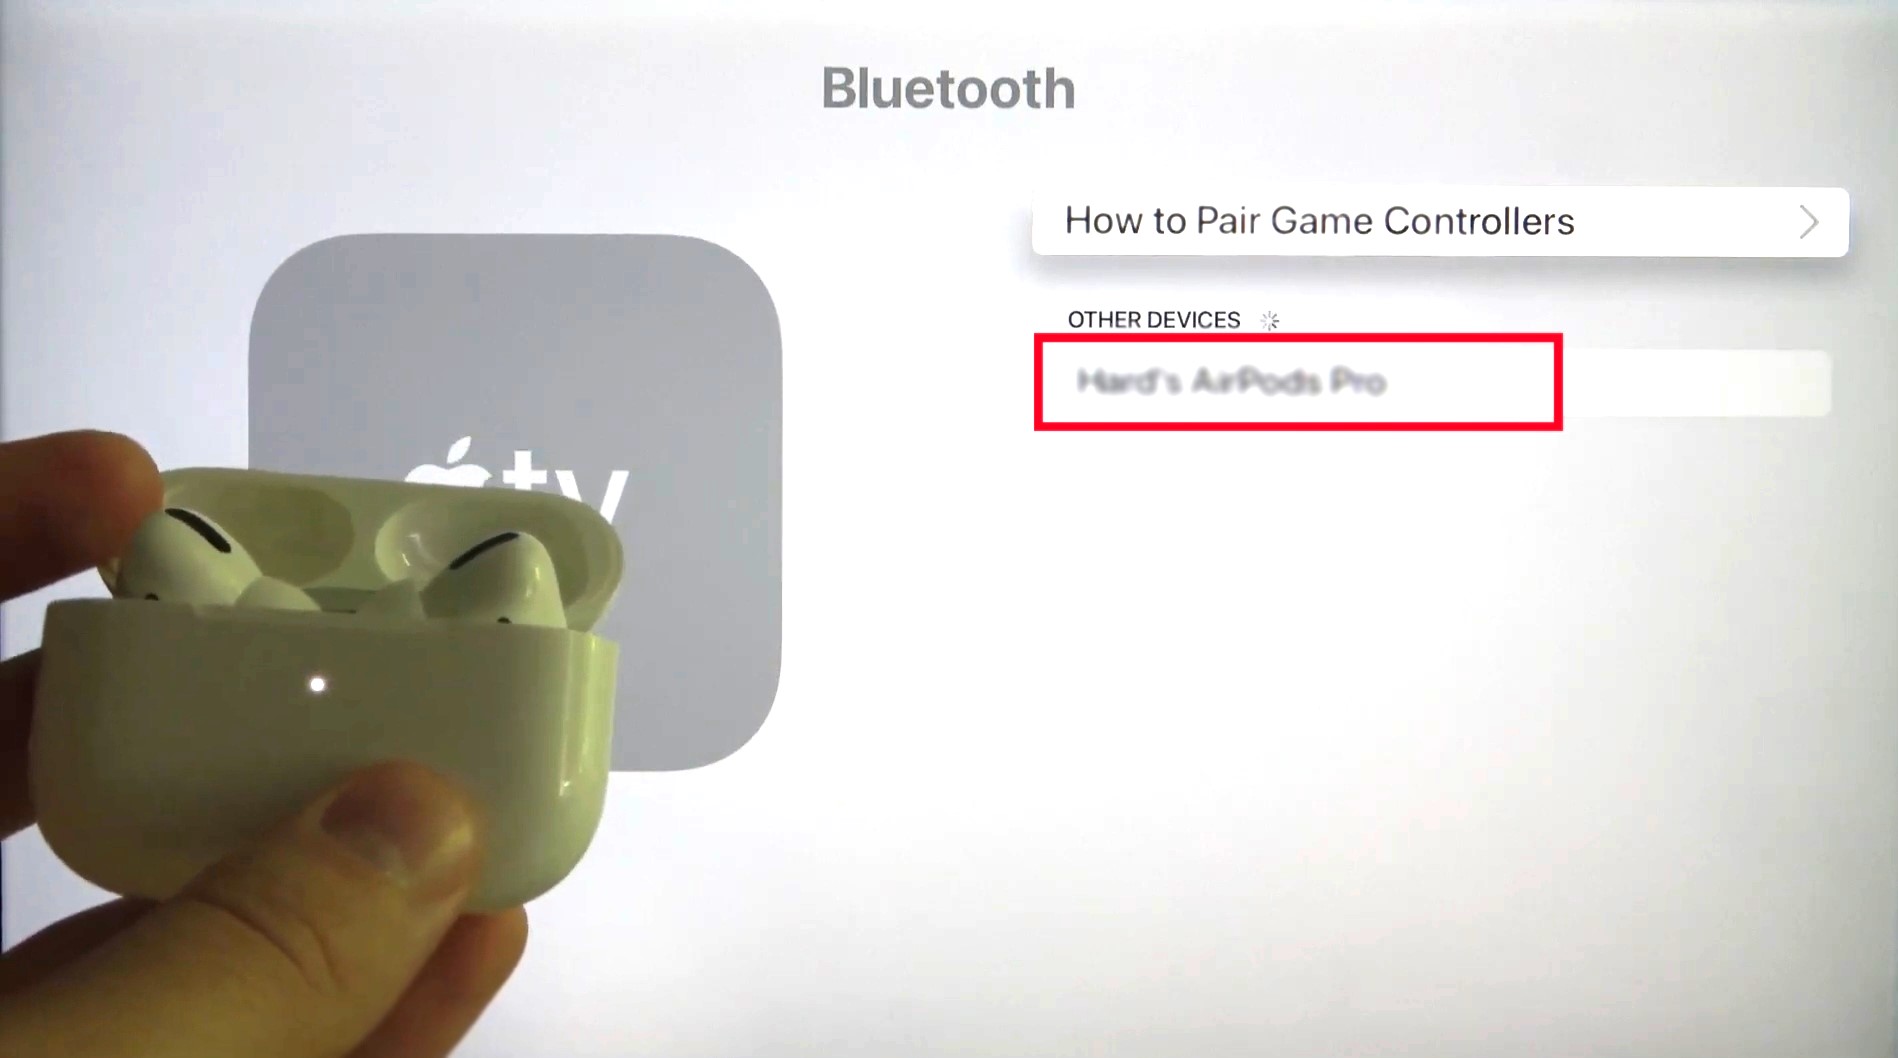 Go To Bluetooth Device to connect